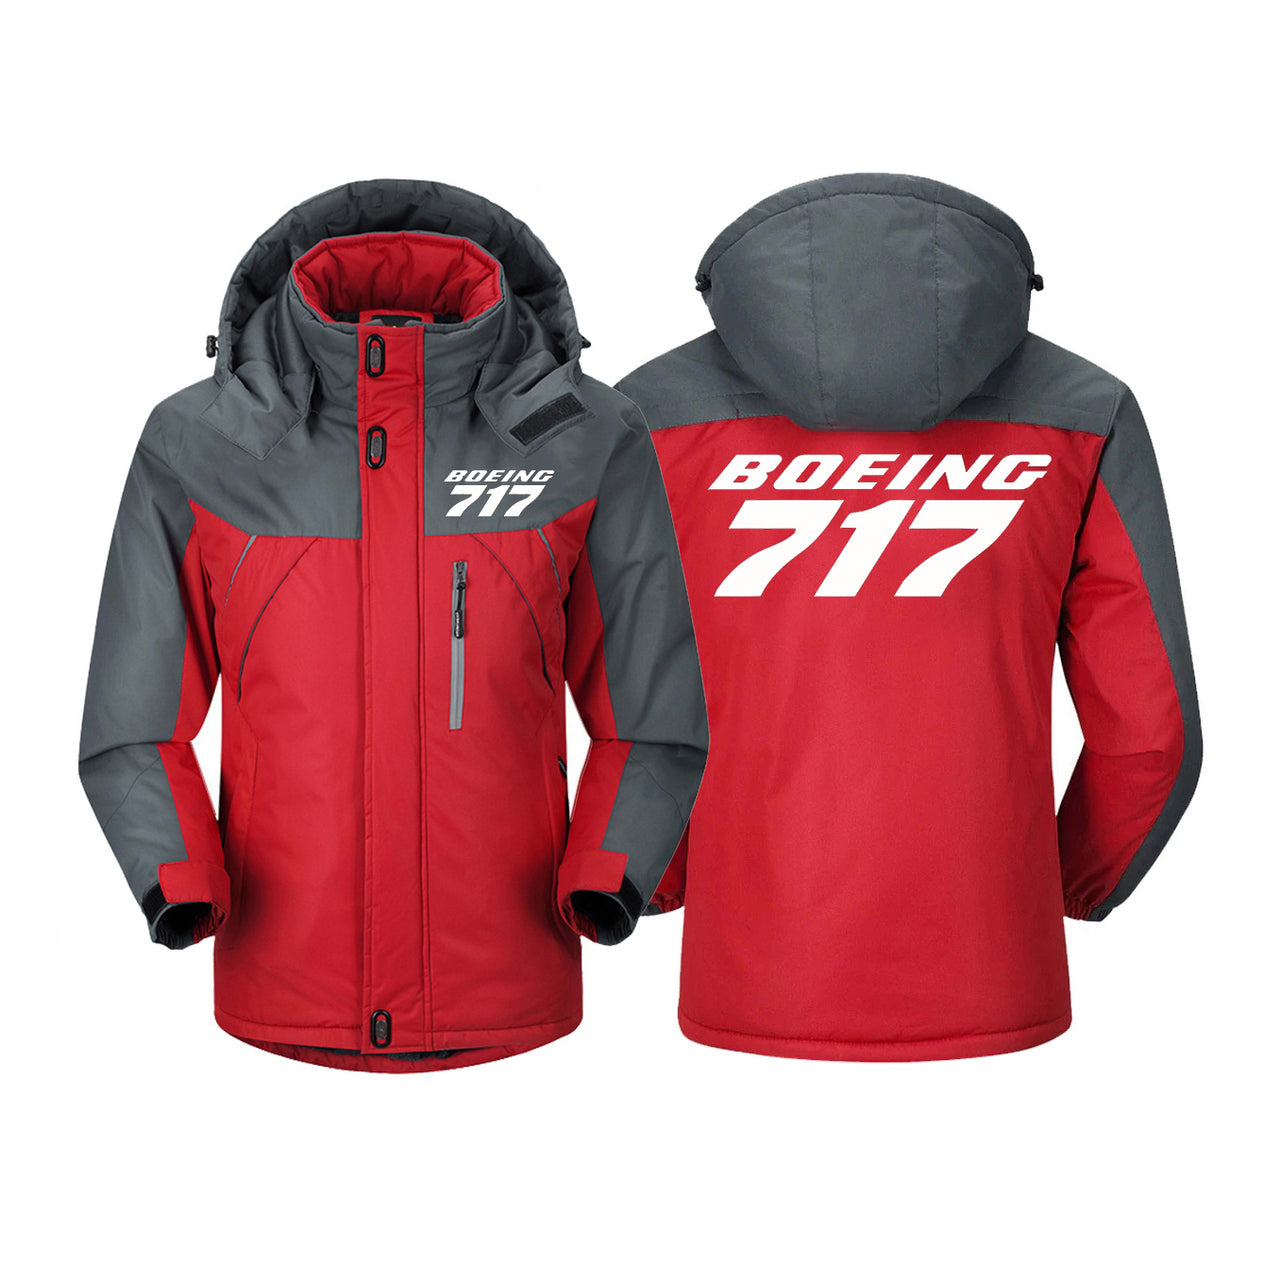 Boeing 717 & Text Designed Thick Winter Jackets